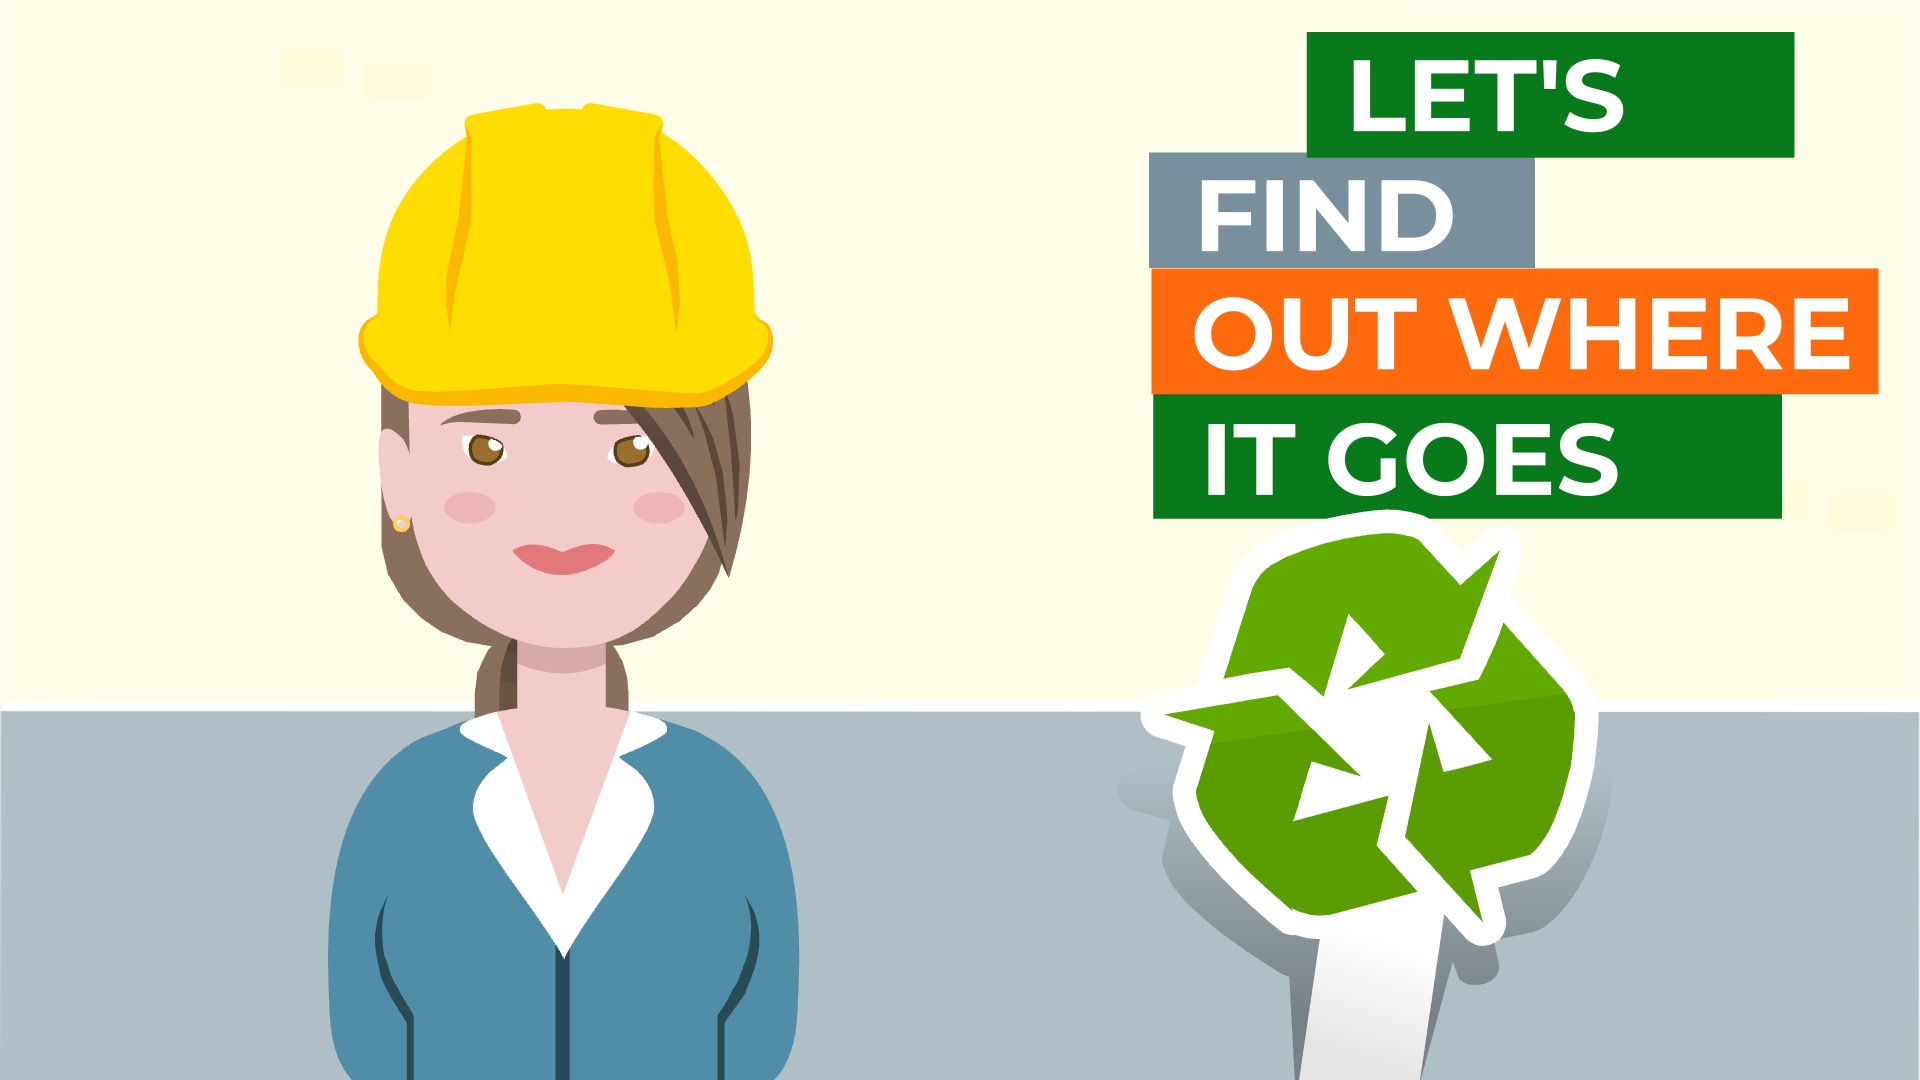 Virtual Commmunity image that reads "Let's find out where it goes" in relation to recycling